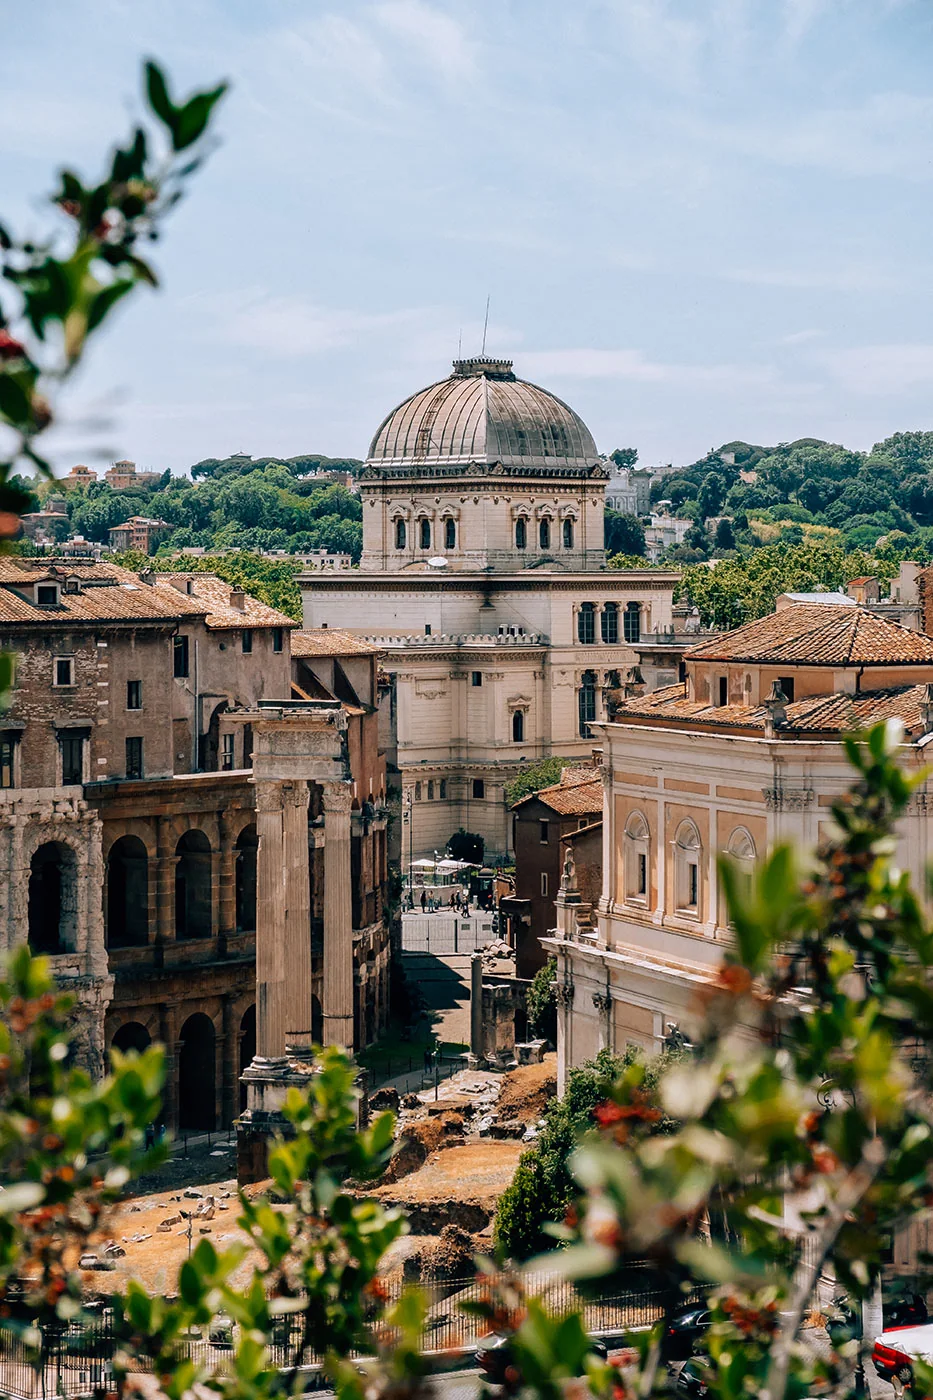 Rome 3 Day Itinerary - Things to do in Rome in 3 days - Jewish Ghetto - Synagogue